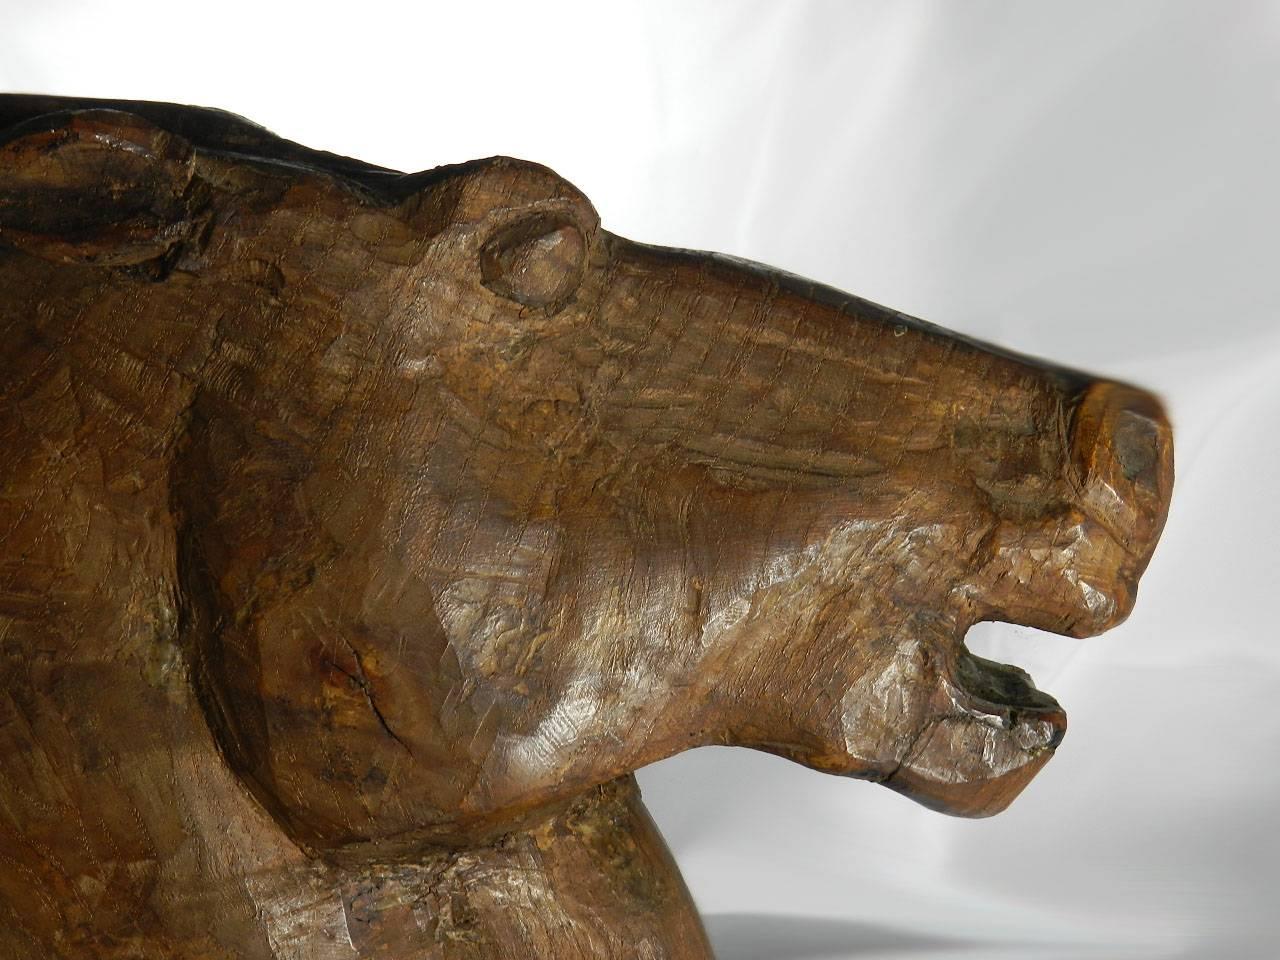 Superb carved horse head sculpture early 20th century not signed.
Solid oak.
A lovely tactile naive folk art. 
This came from a French Estate where the family was of French Scandinavian origin and the Grandfather was a keen art collector and